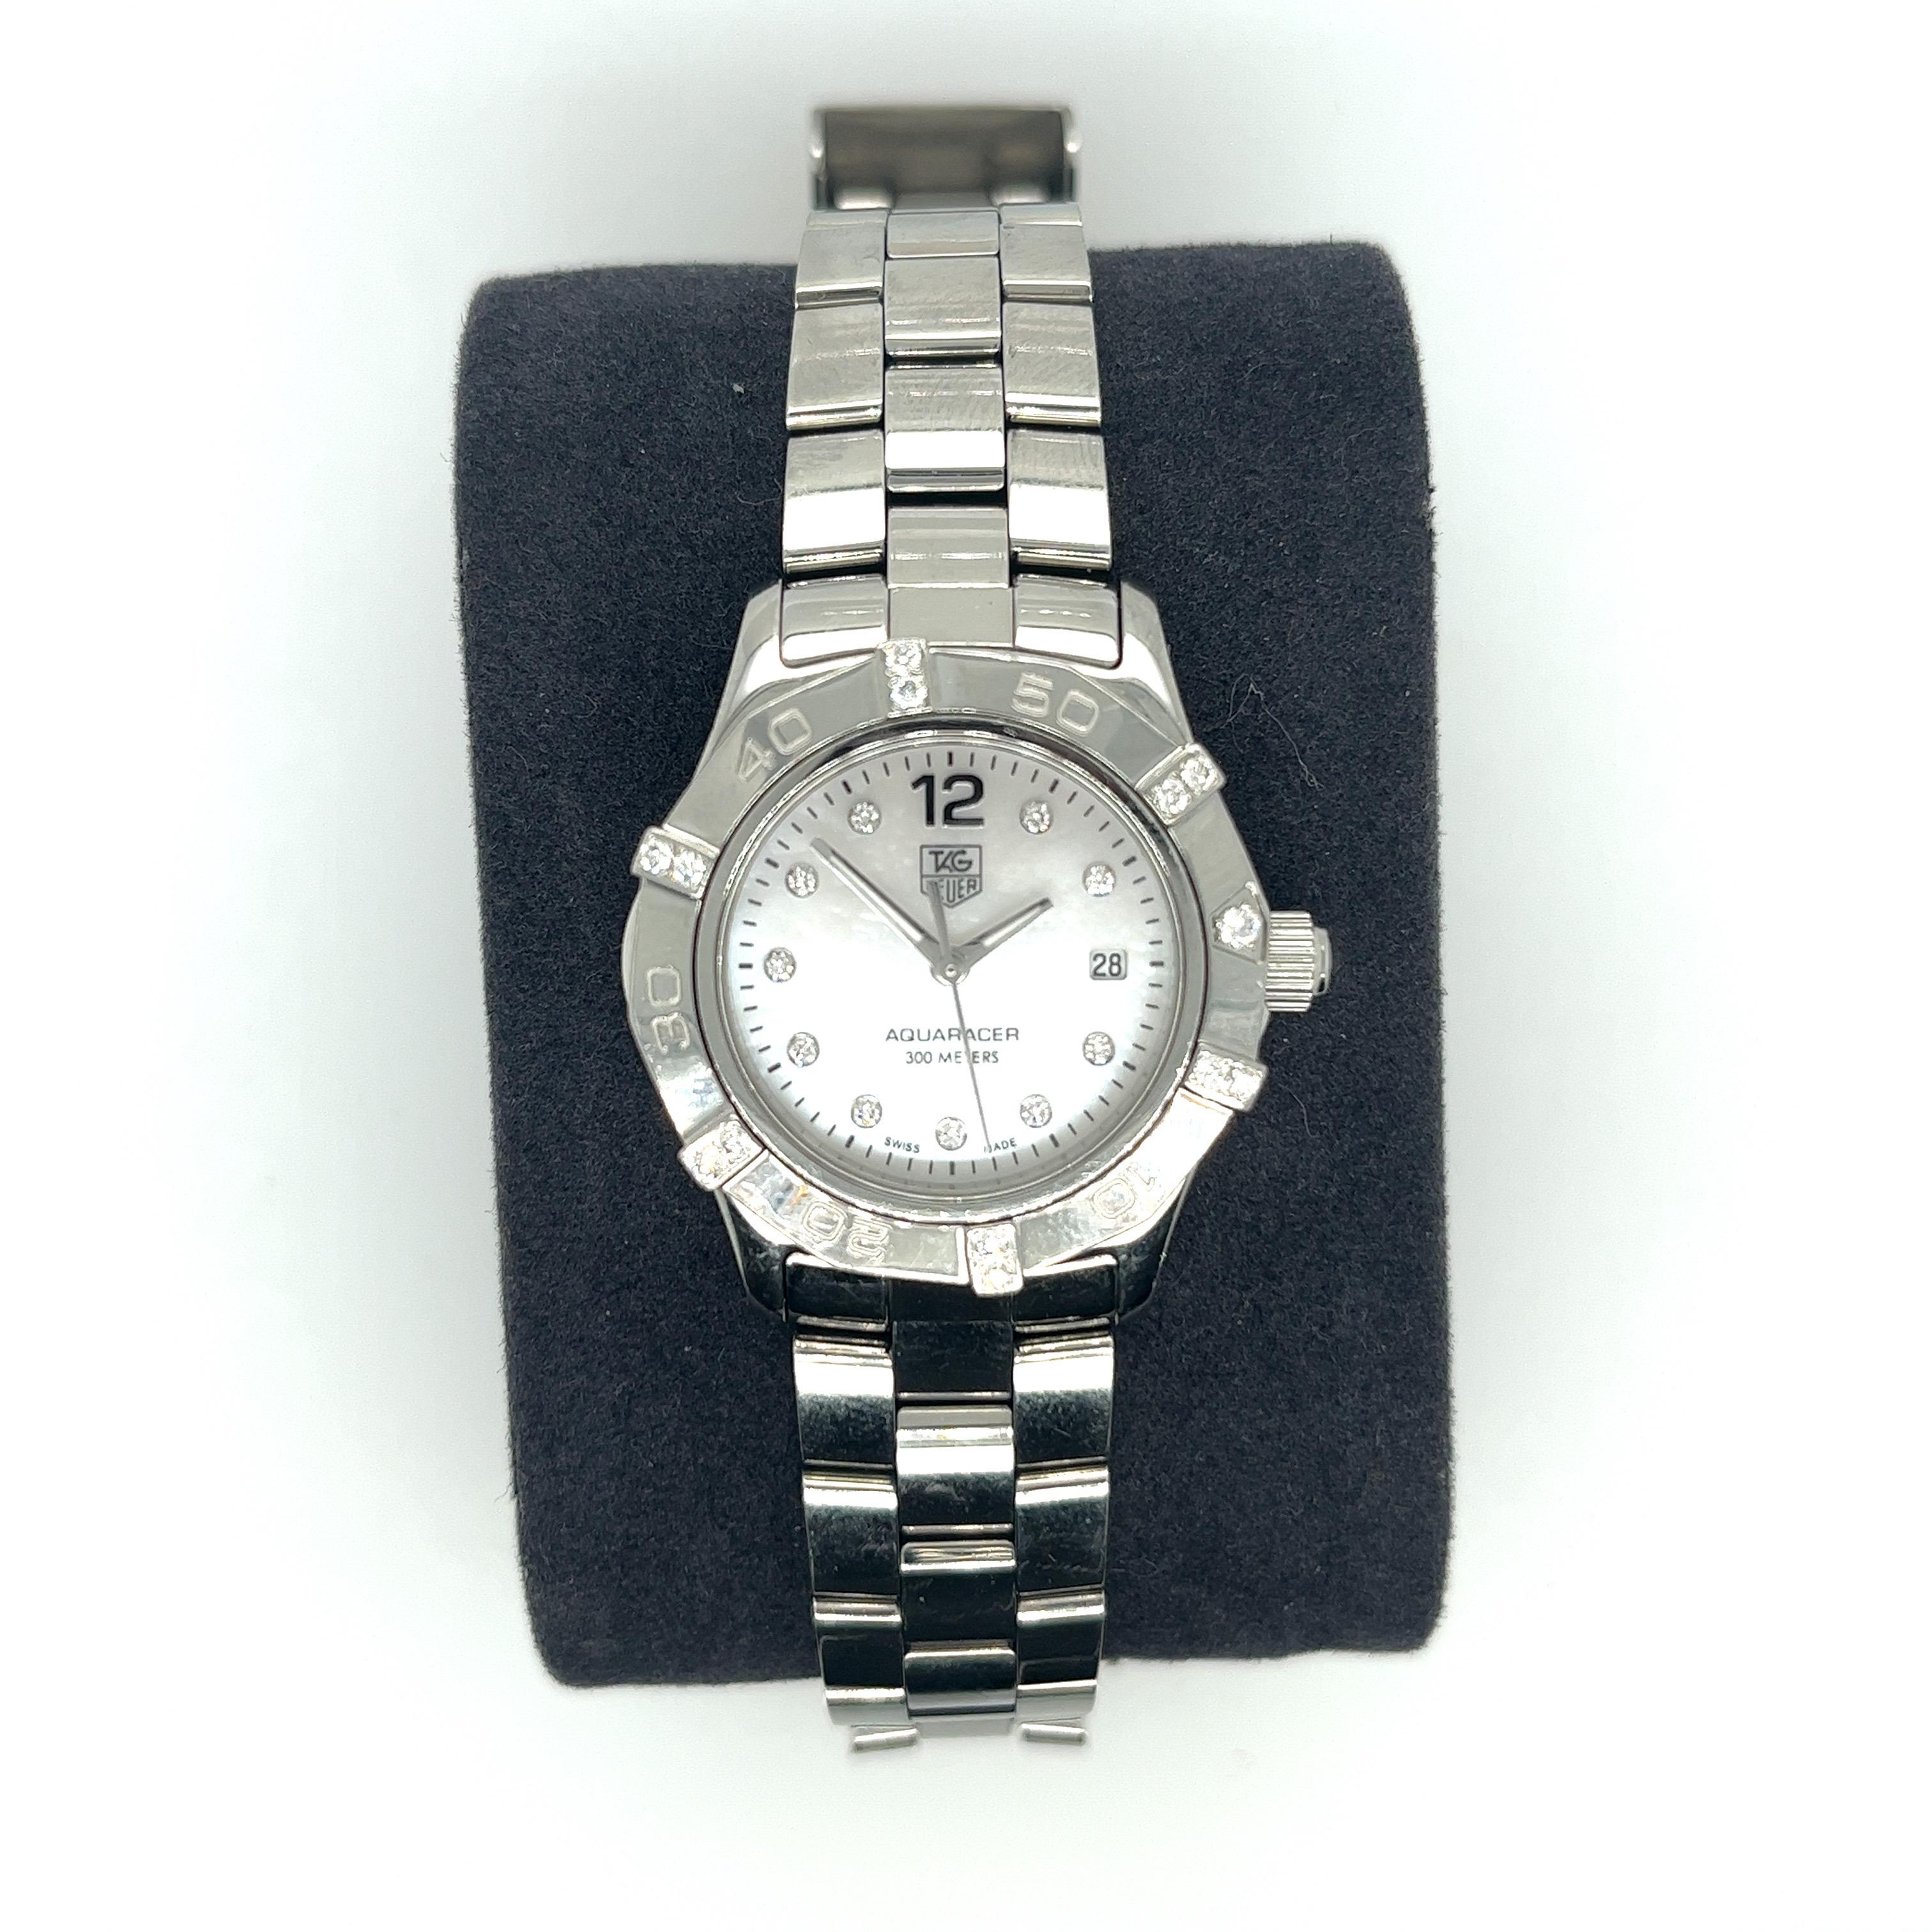 This stunning TAG Heuer Aquaracer Lady Ref LG9075/WAF141G is crafted with a steel case, mother of pearl Dial and diamond numeral markers. The case is set with diamonds at certain spots around it and is moveable. The bracelet fits up to a 6